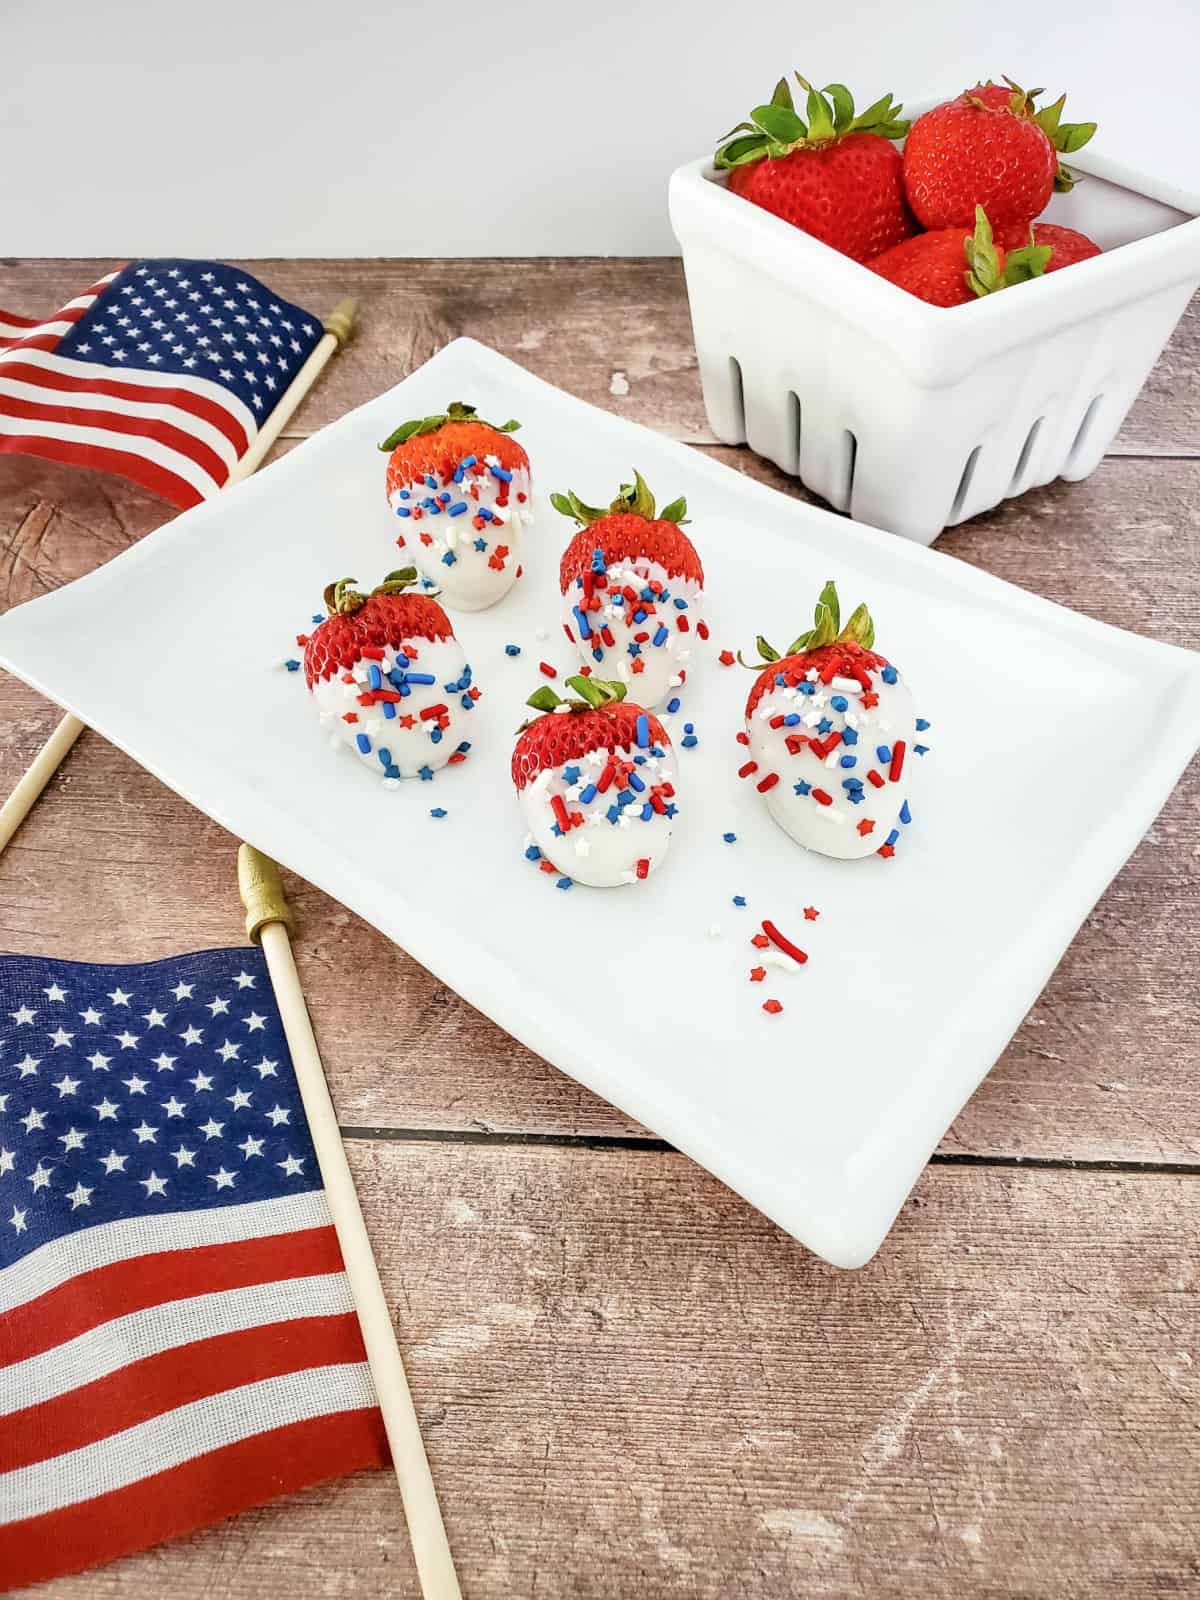 White chocolate dipped strawberries covered in sprinkles on a white rectangular tray. There's a white bowl of strawberries and small American flags.